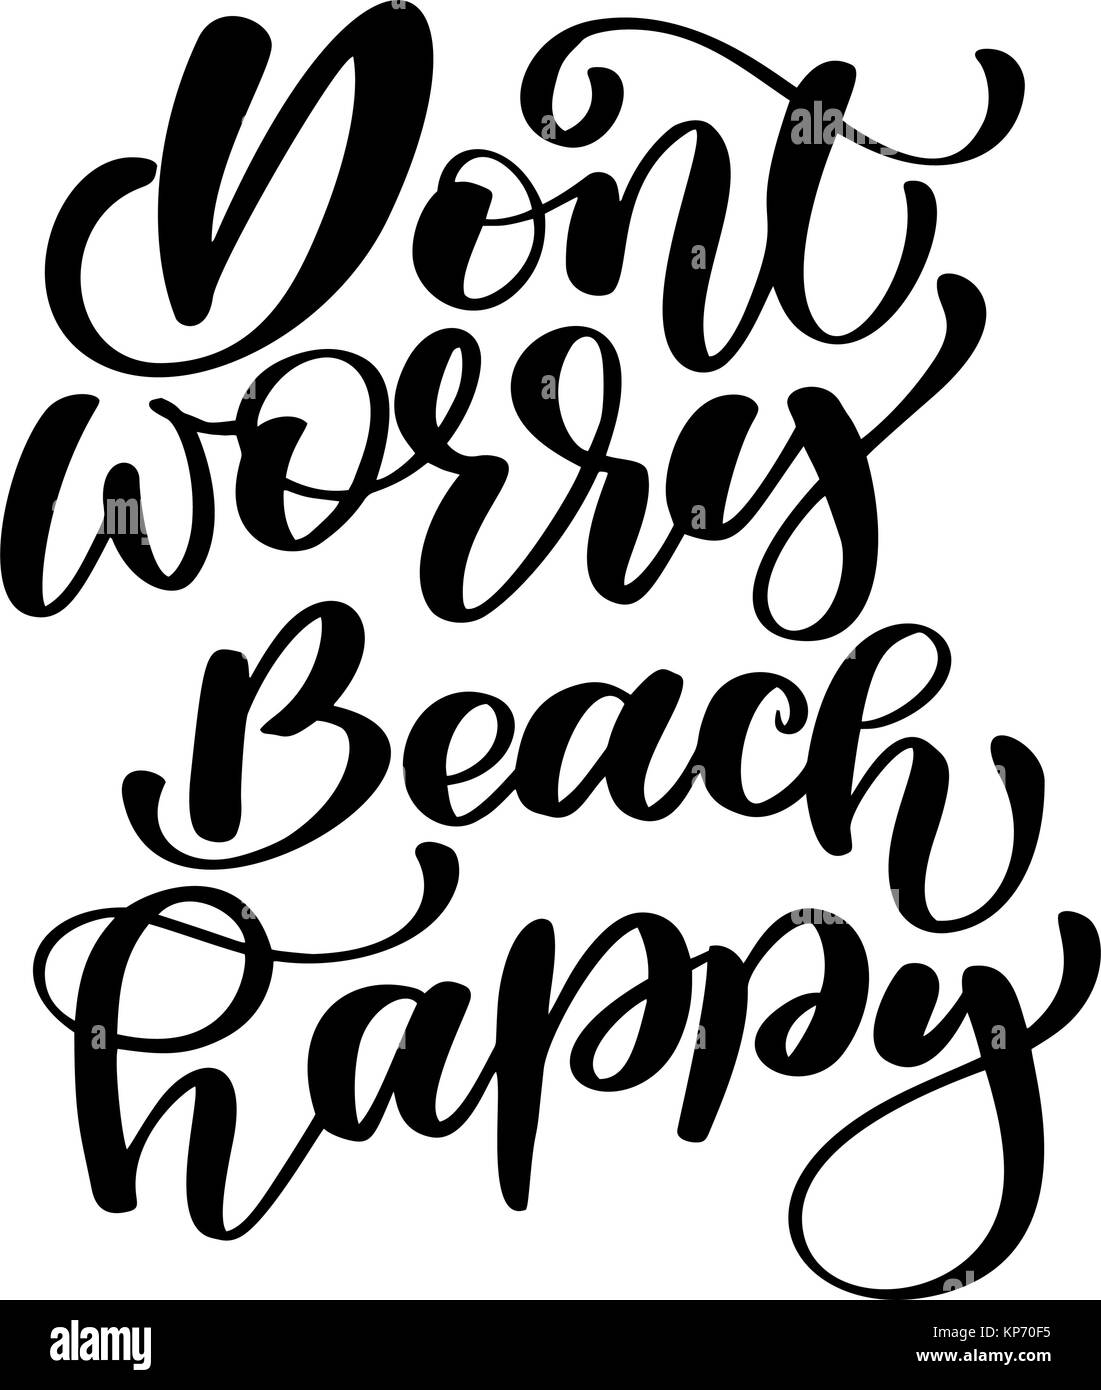 Dont worry beach happy Summer text holidays and vacation hand drawn vector illustration. Can use for print greeting cards, handbags, photo overlays, t-shirt print, mug, pillow, flyer, poster design. Handwritten calligraphy quote Stock Vector